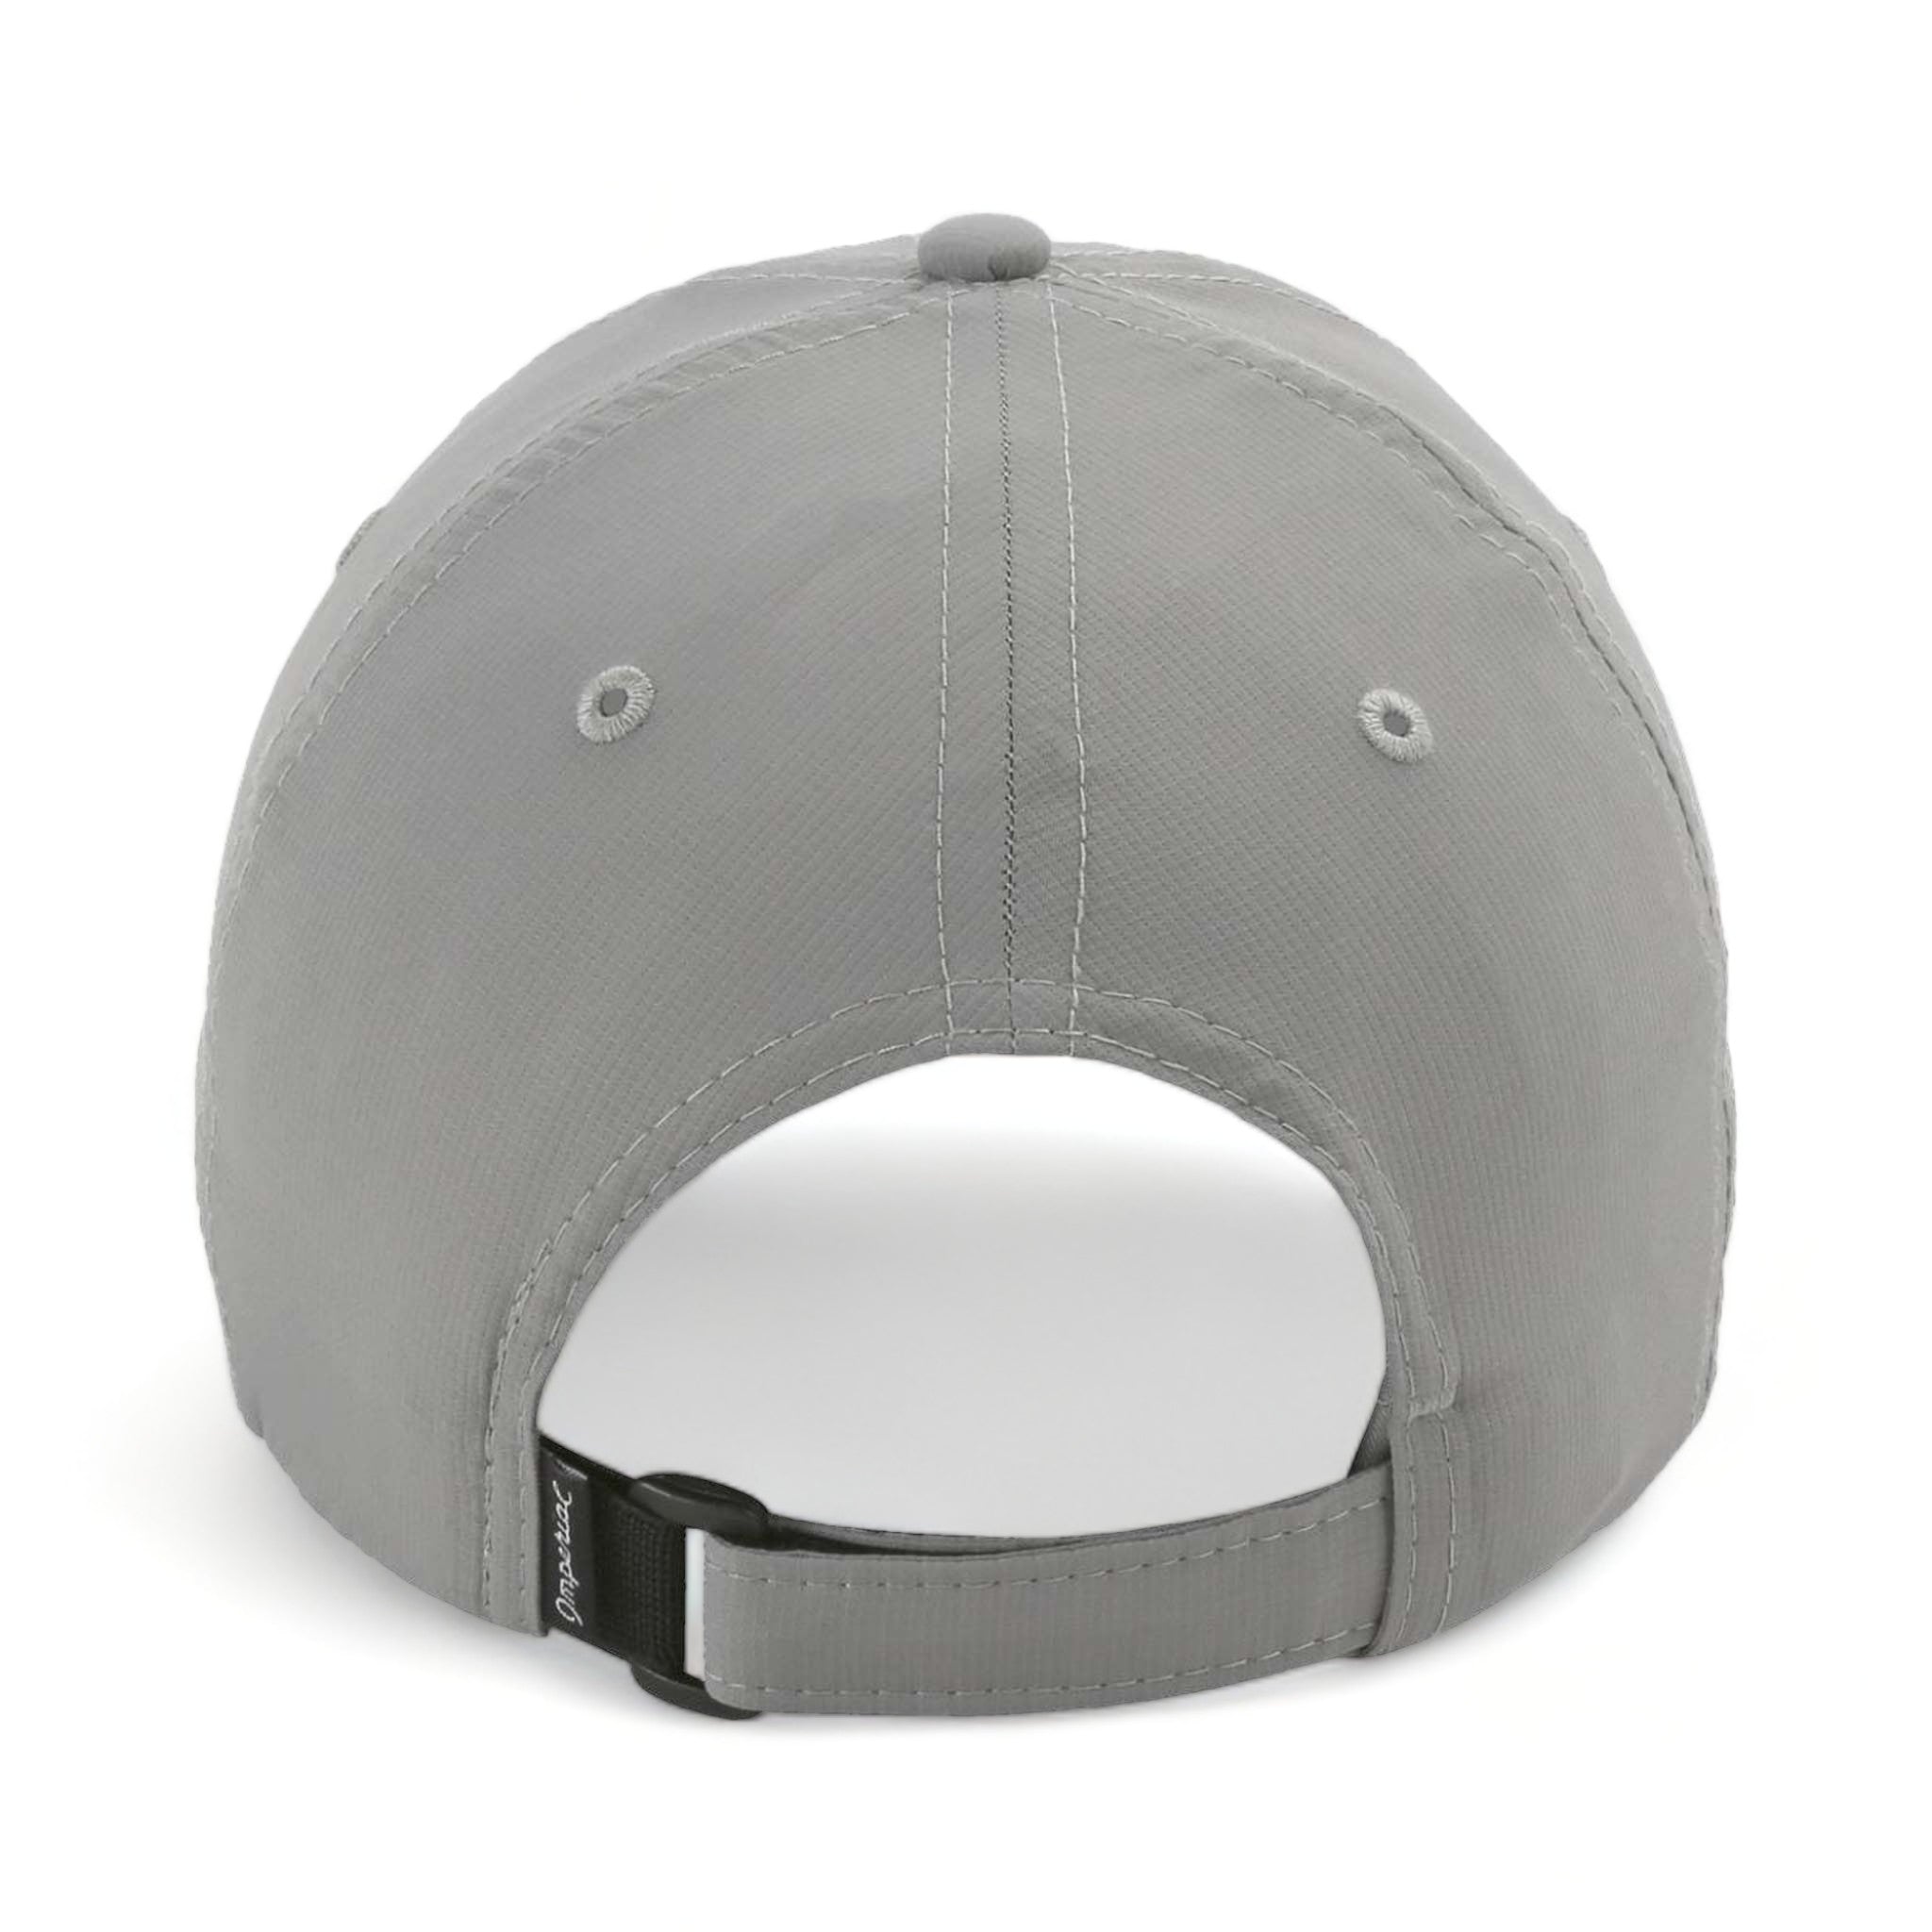 Back view of Imperial X210P custom hat in frost grey